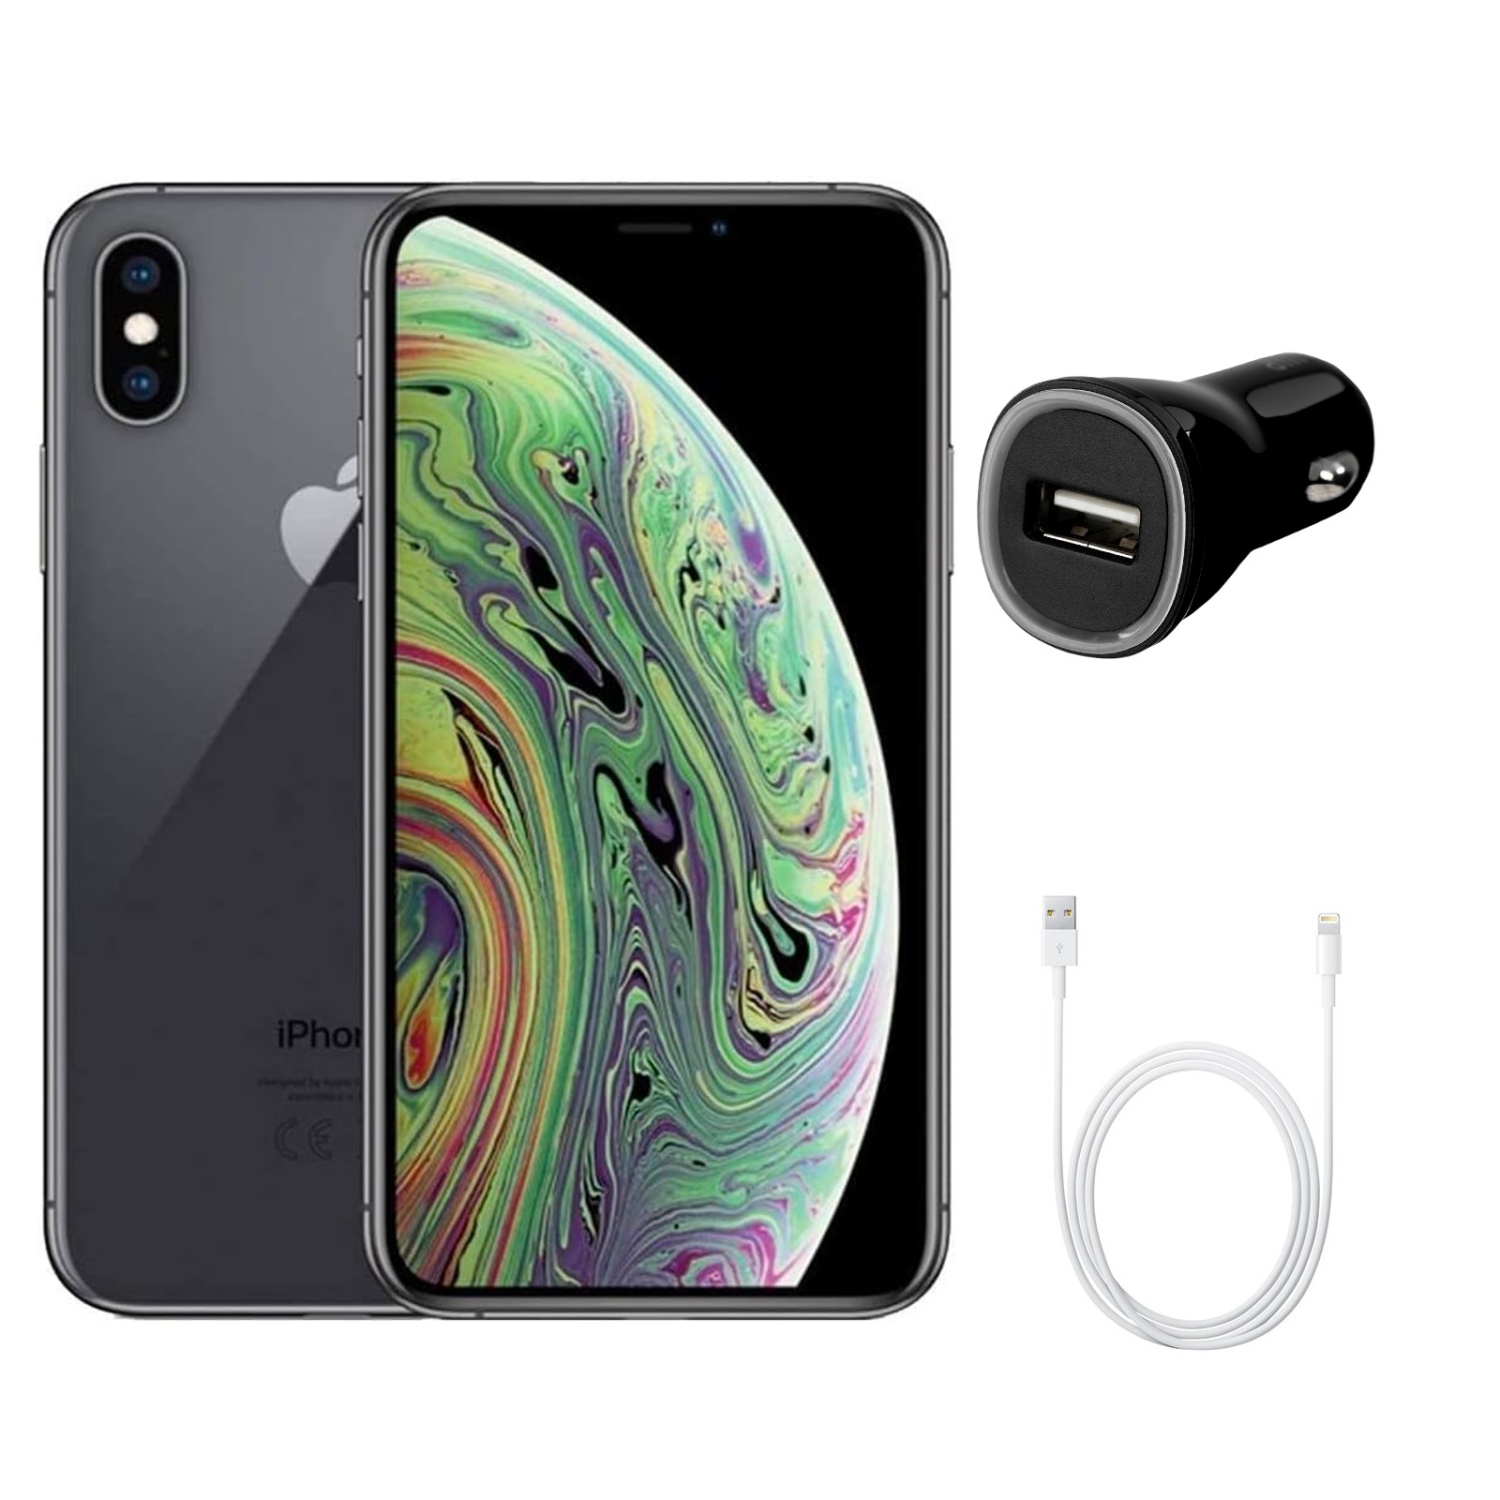 Refurbished (Good) Apple iPhone XS Max A1921 (Fully Unlocked) 64GB Space Gray w/ Fast Car Charger